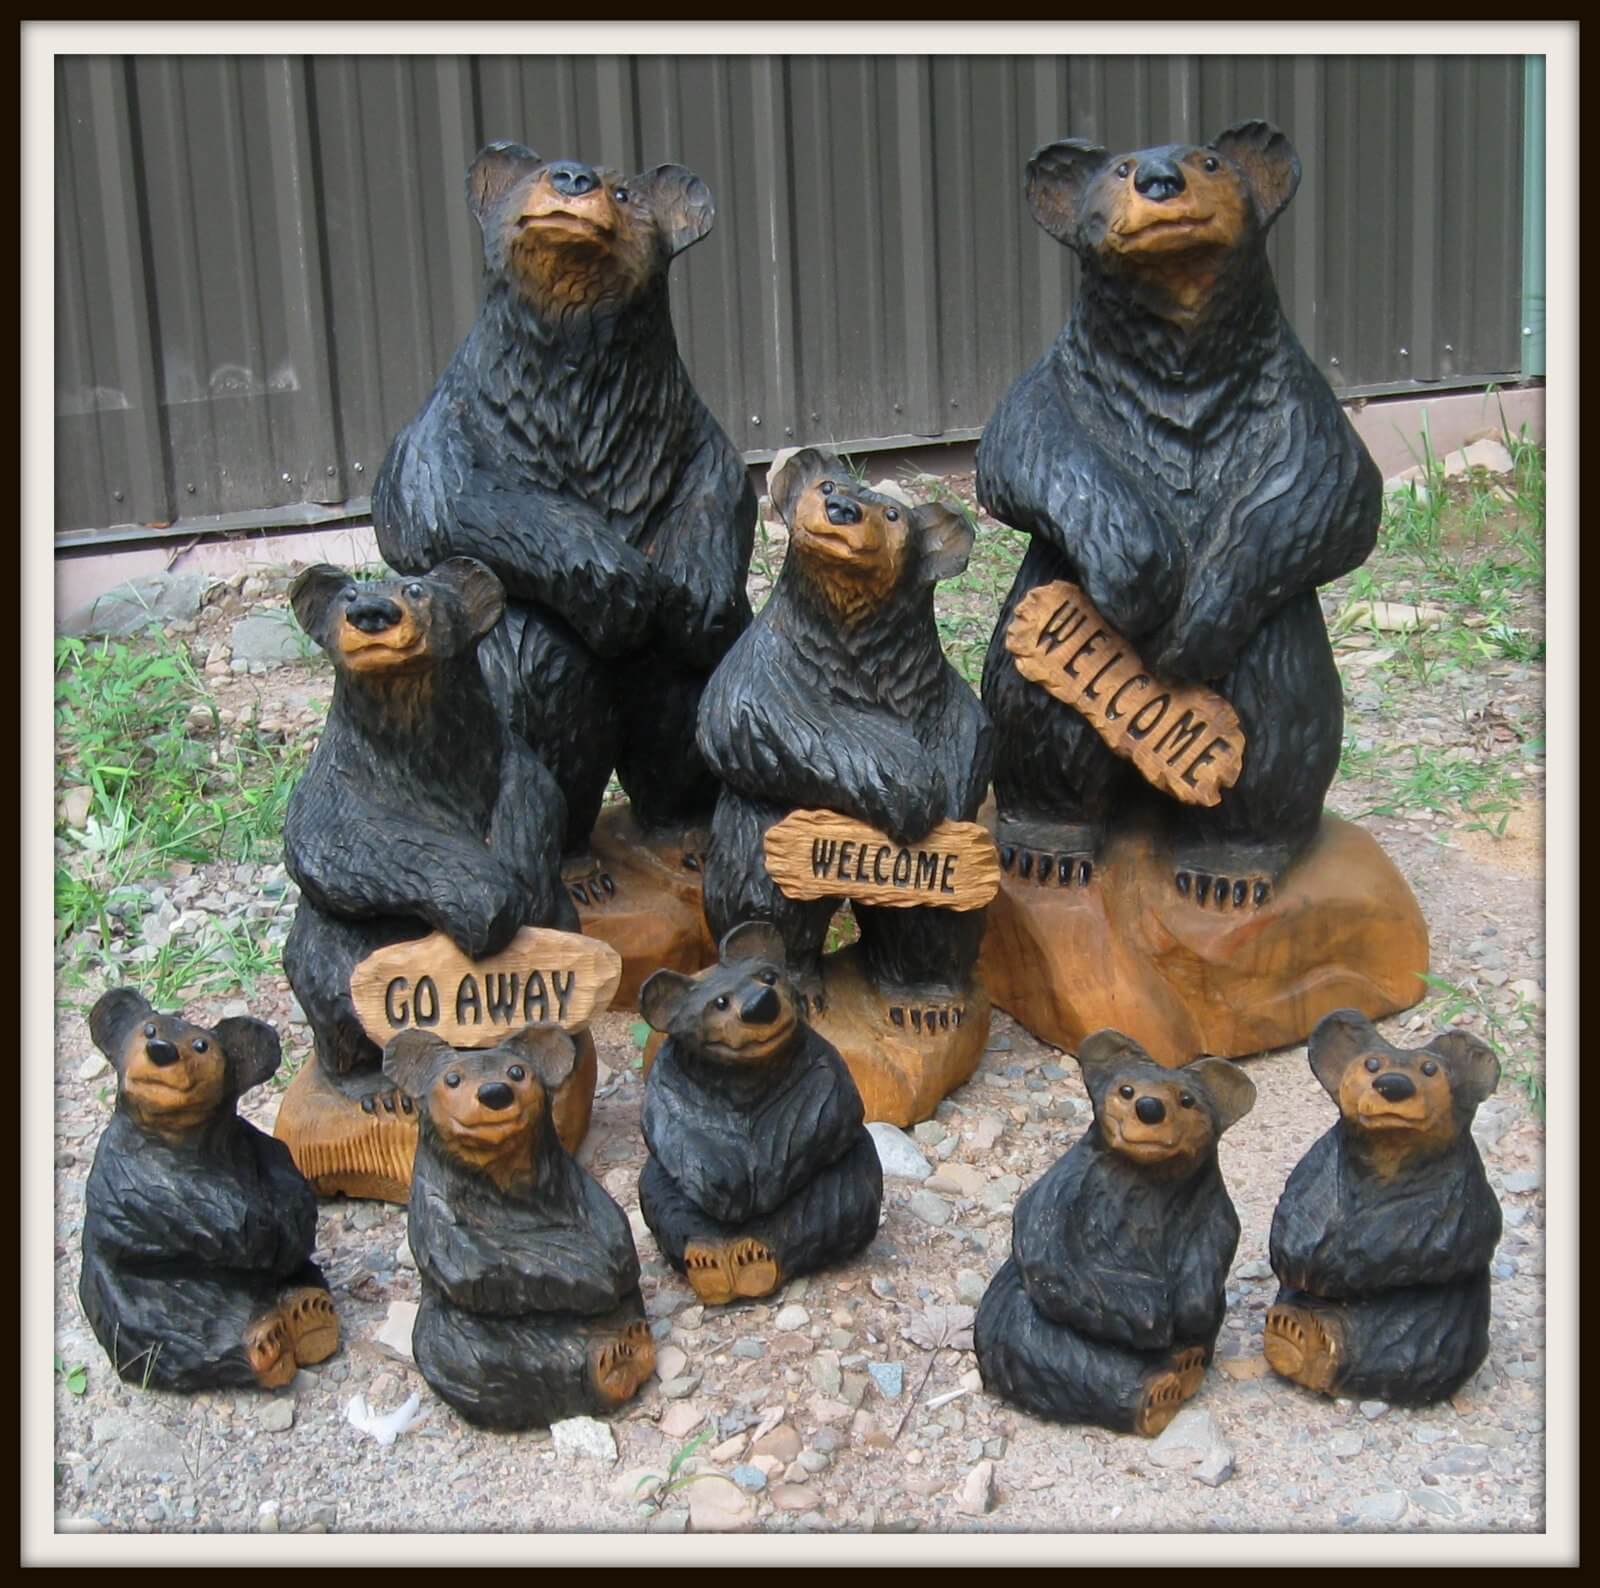 Harnett Designs Woodworking: Maple Live Edge Table, chainsaw art, bears, handcrafted furniture